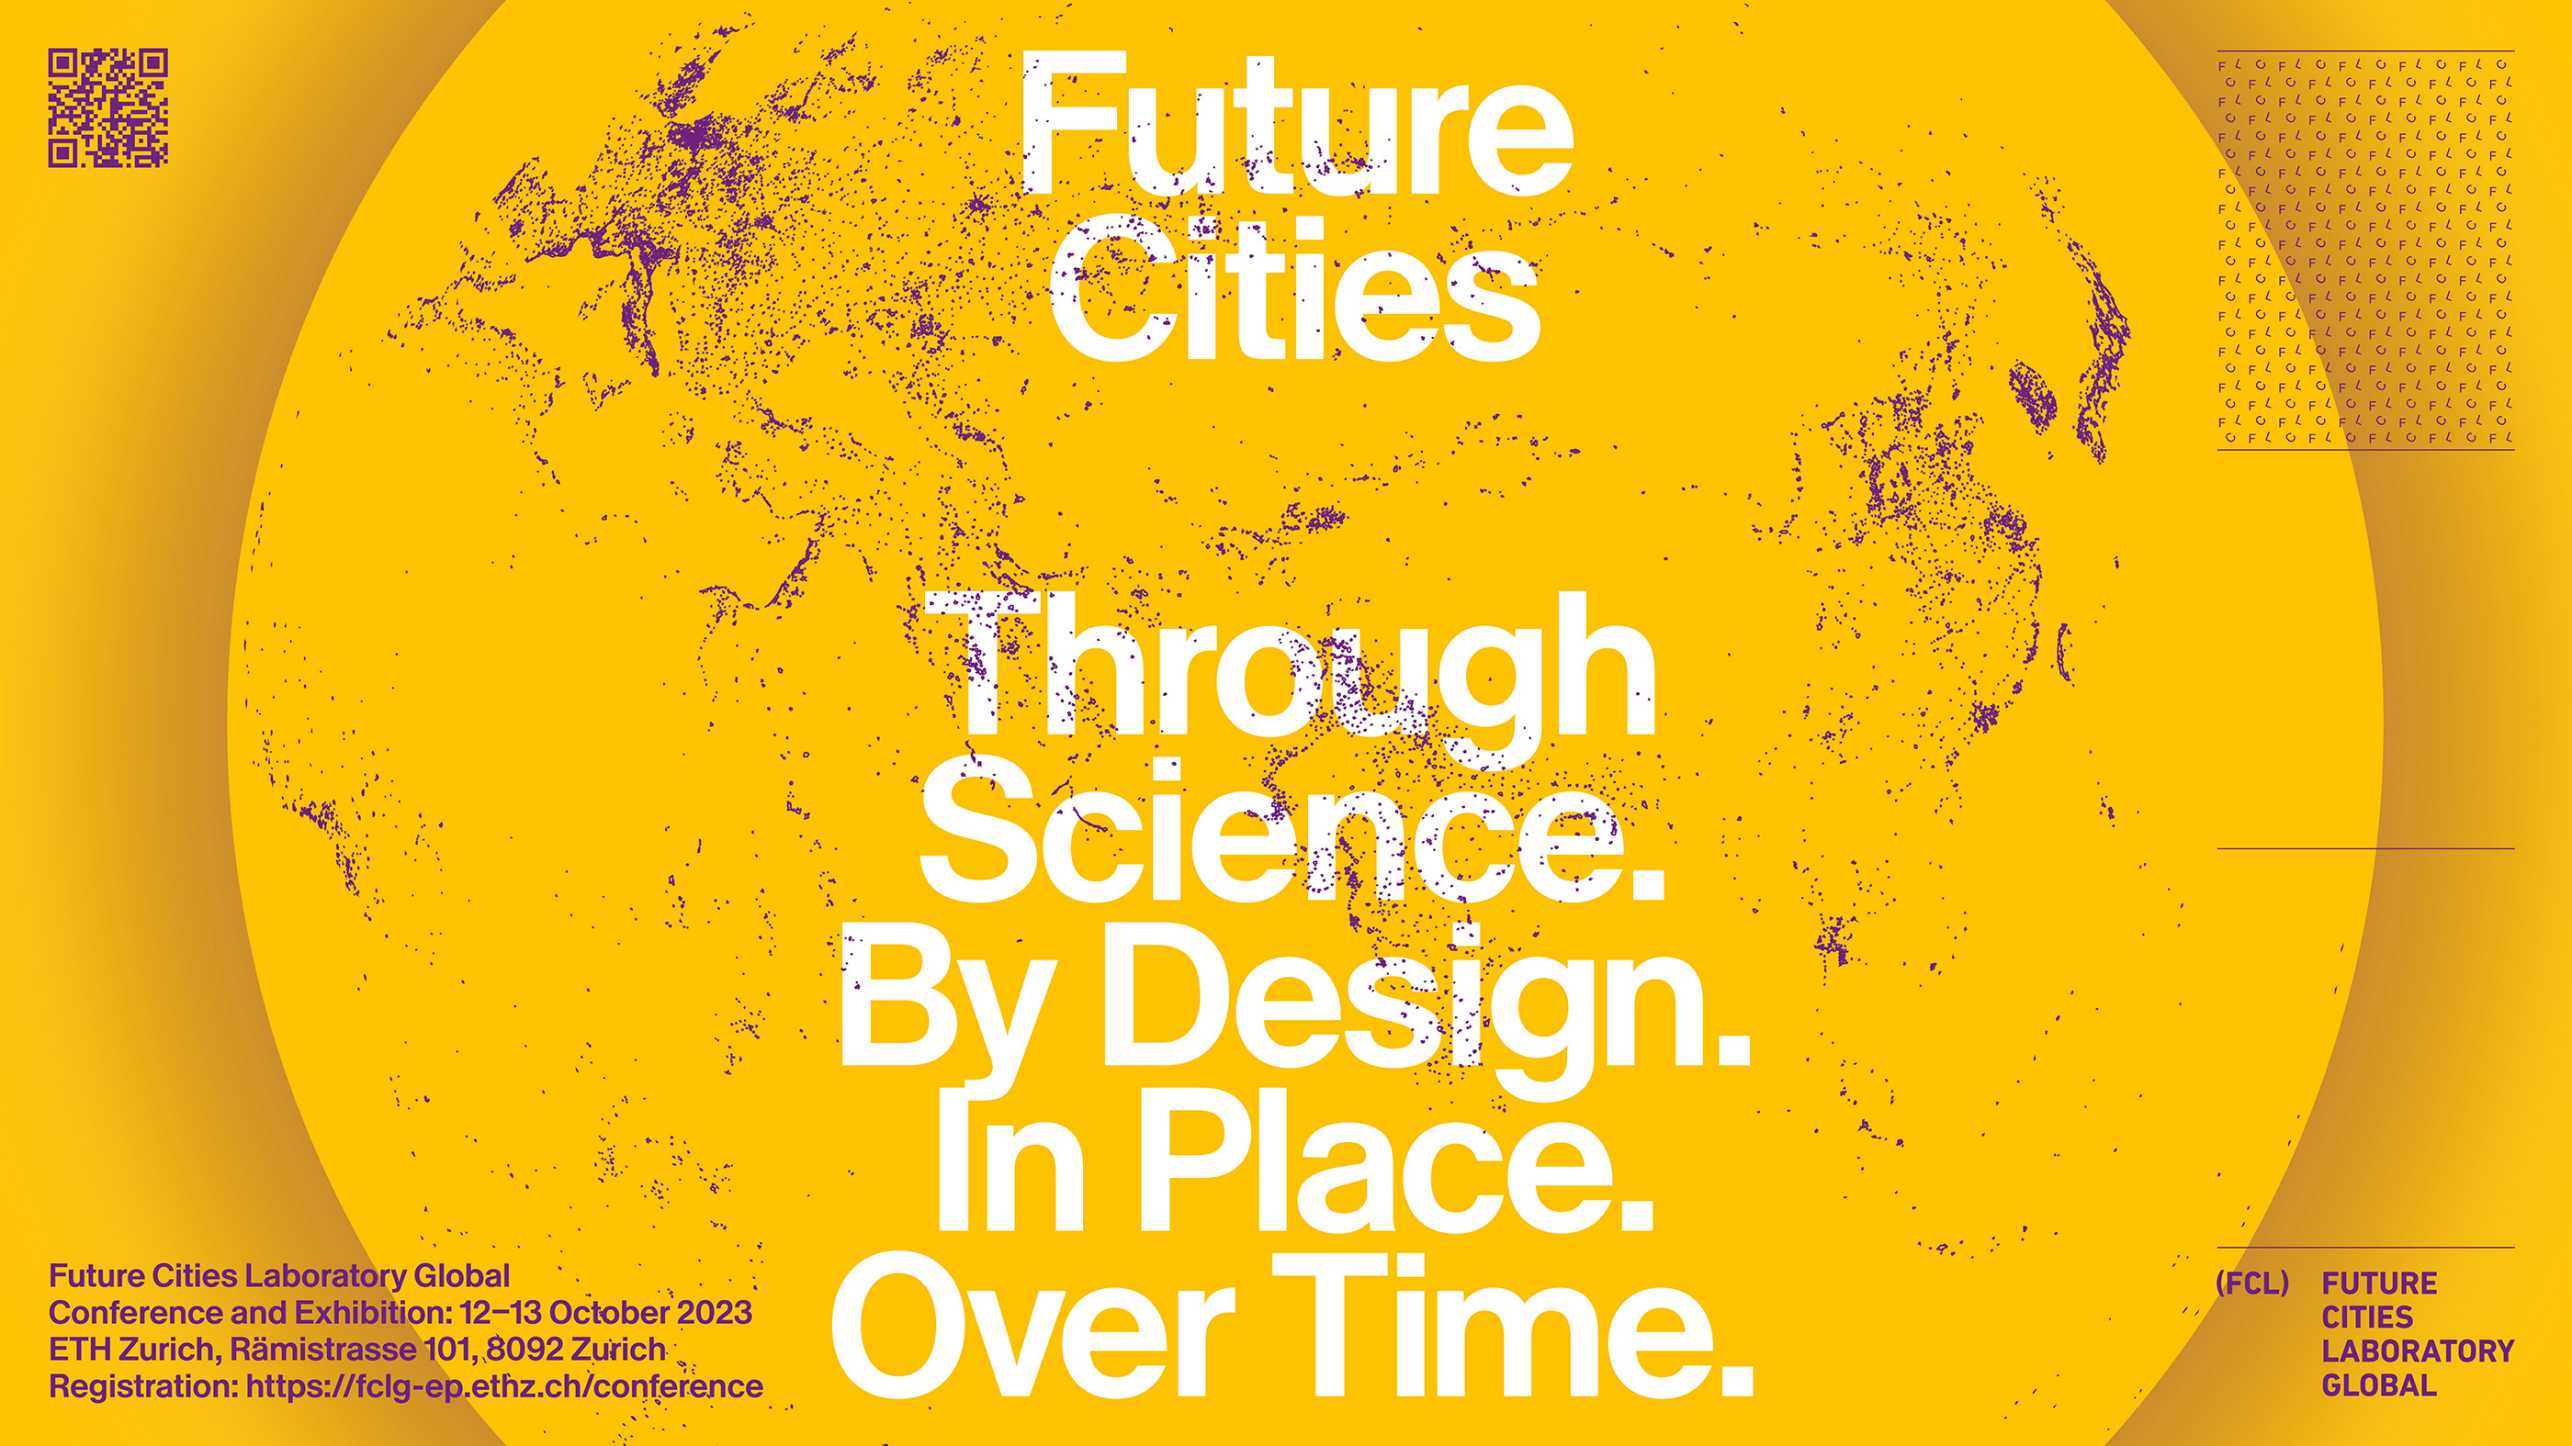 Future Cities. Through Science. By Design. In Place. Over Time.